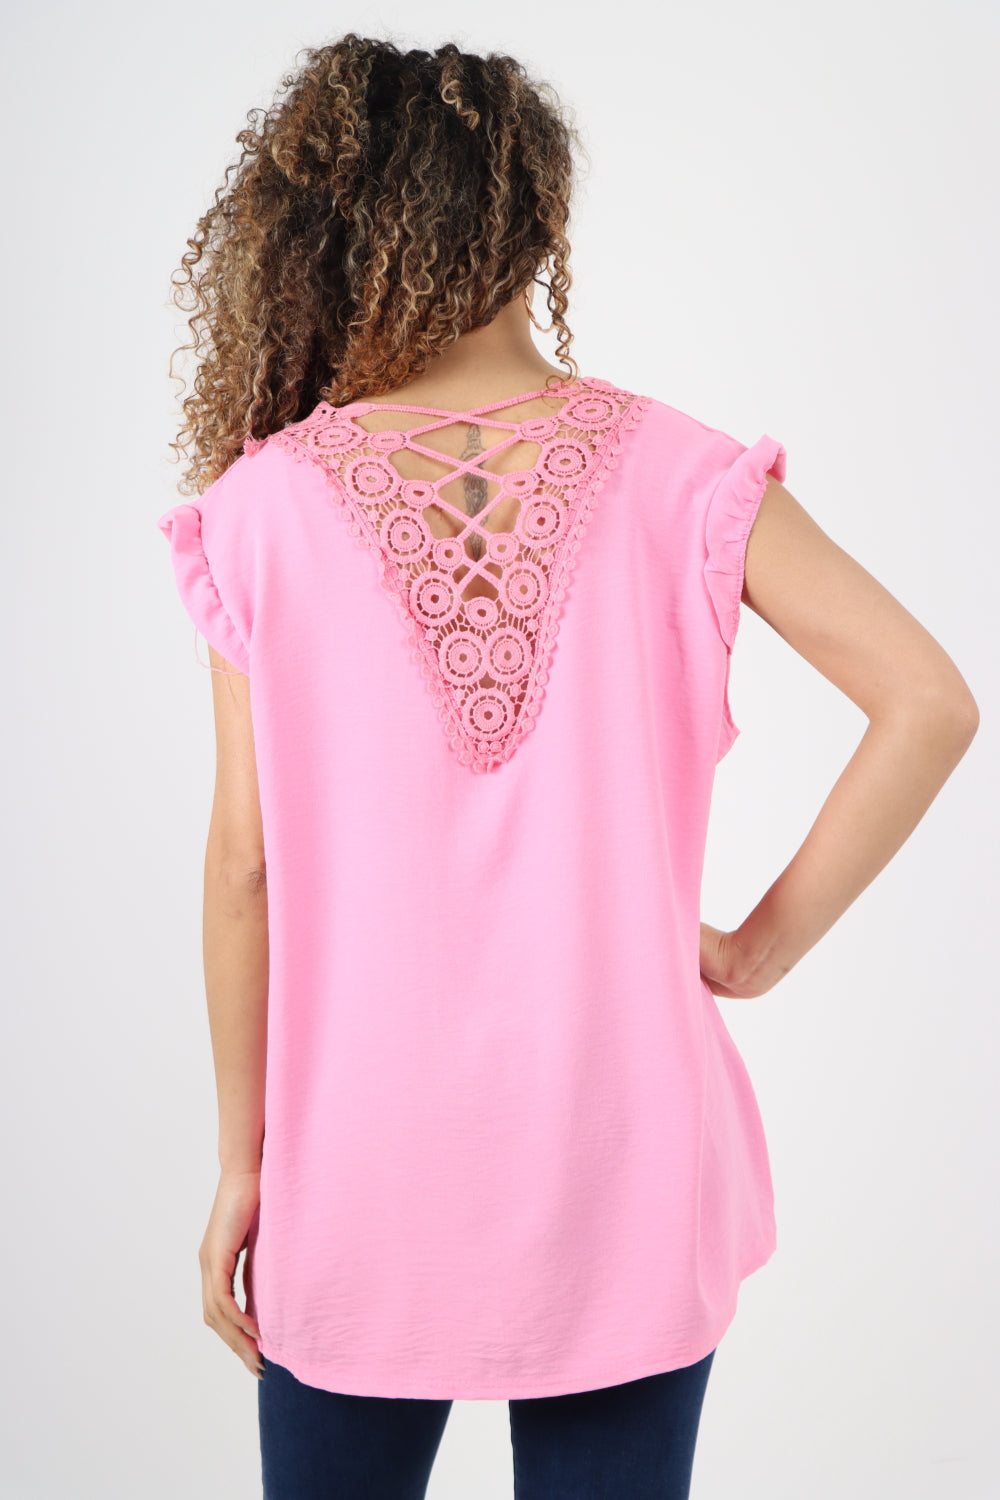 Italian Cap Sleeve With Detailed Back Lace Design Blouse Top